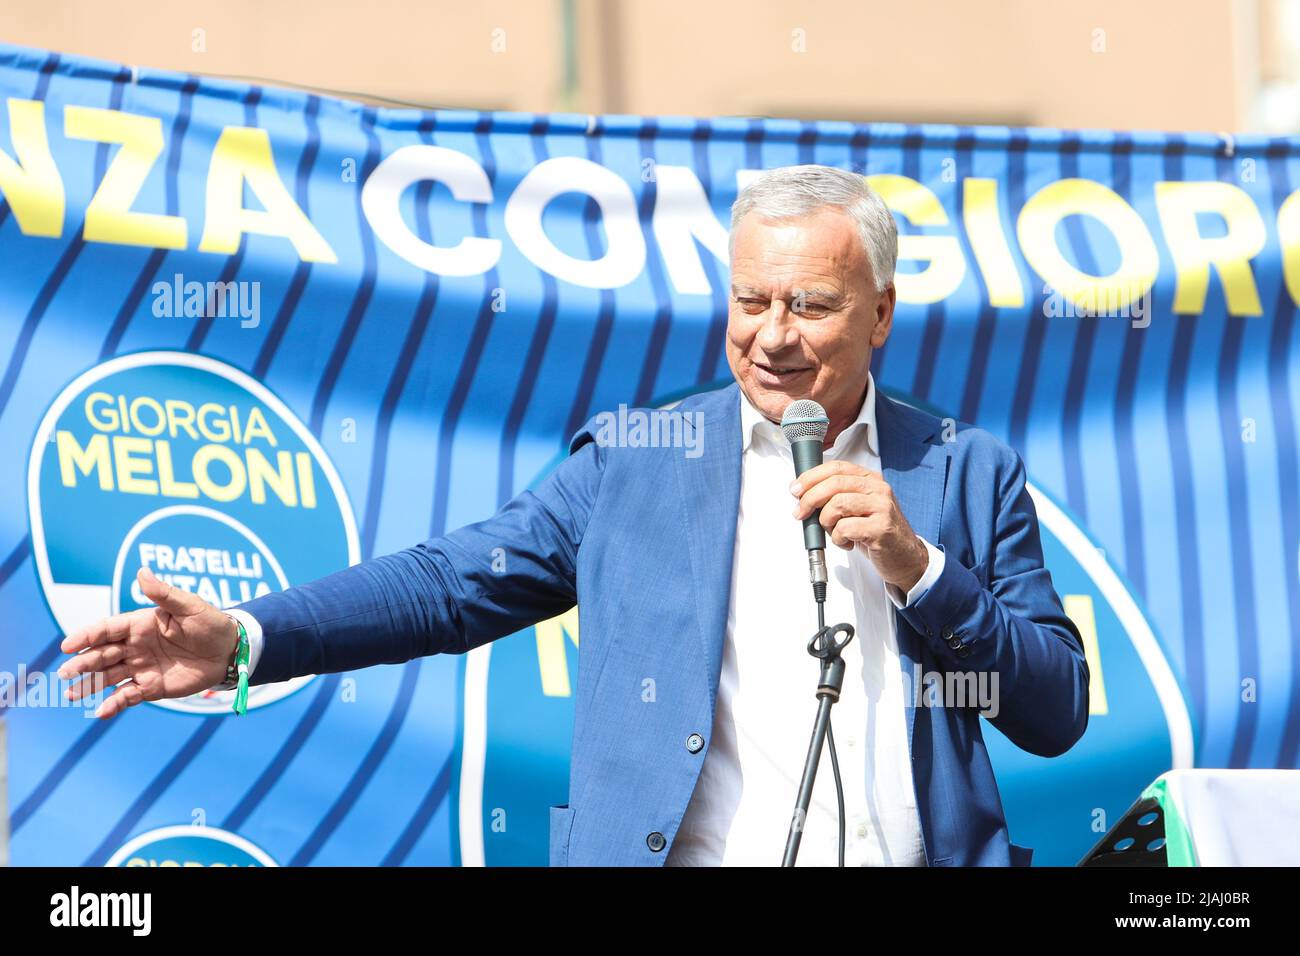 Dario Allevi is seen while Giorgia Meloni, leader of the political party of the Fratelli d'Italia spoke in support of the center-right candidate Dario Allevi in Monza, Italy, on May 30, 2022 Stock Photo